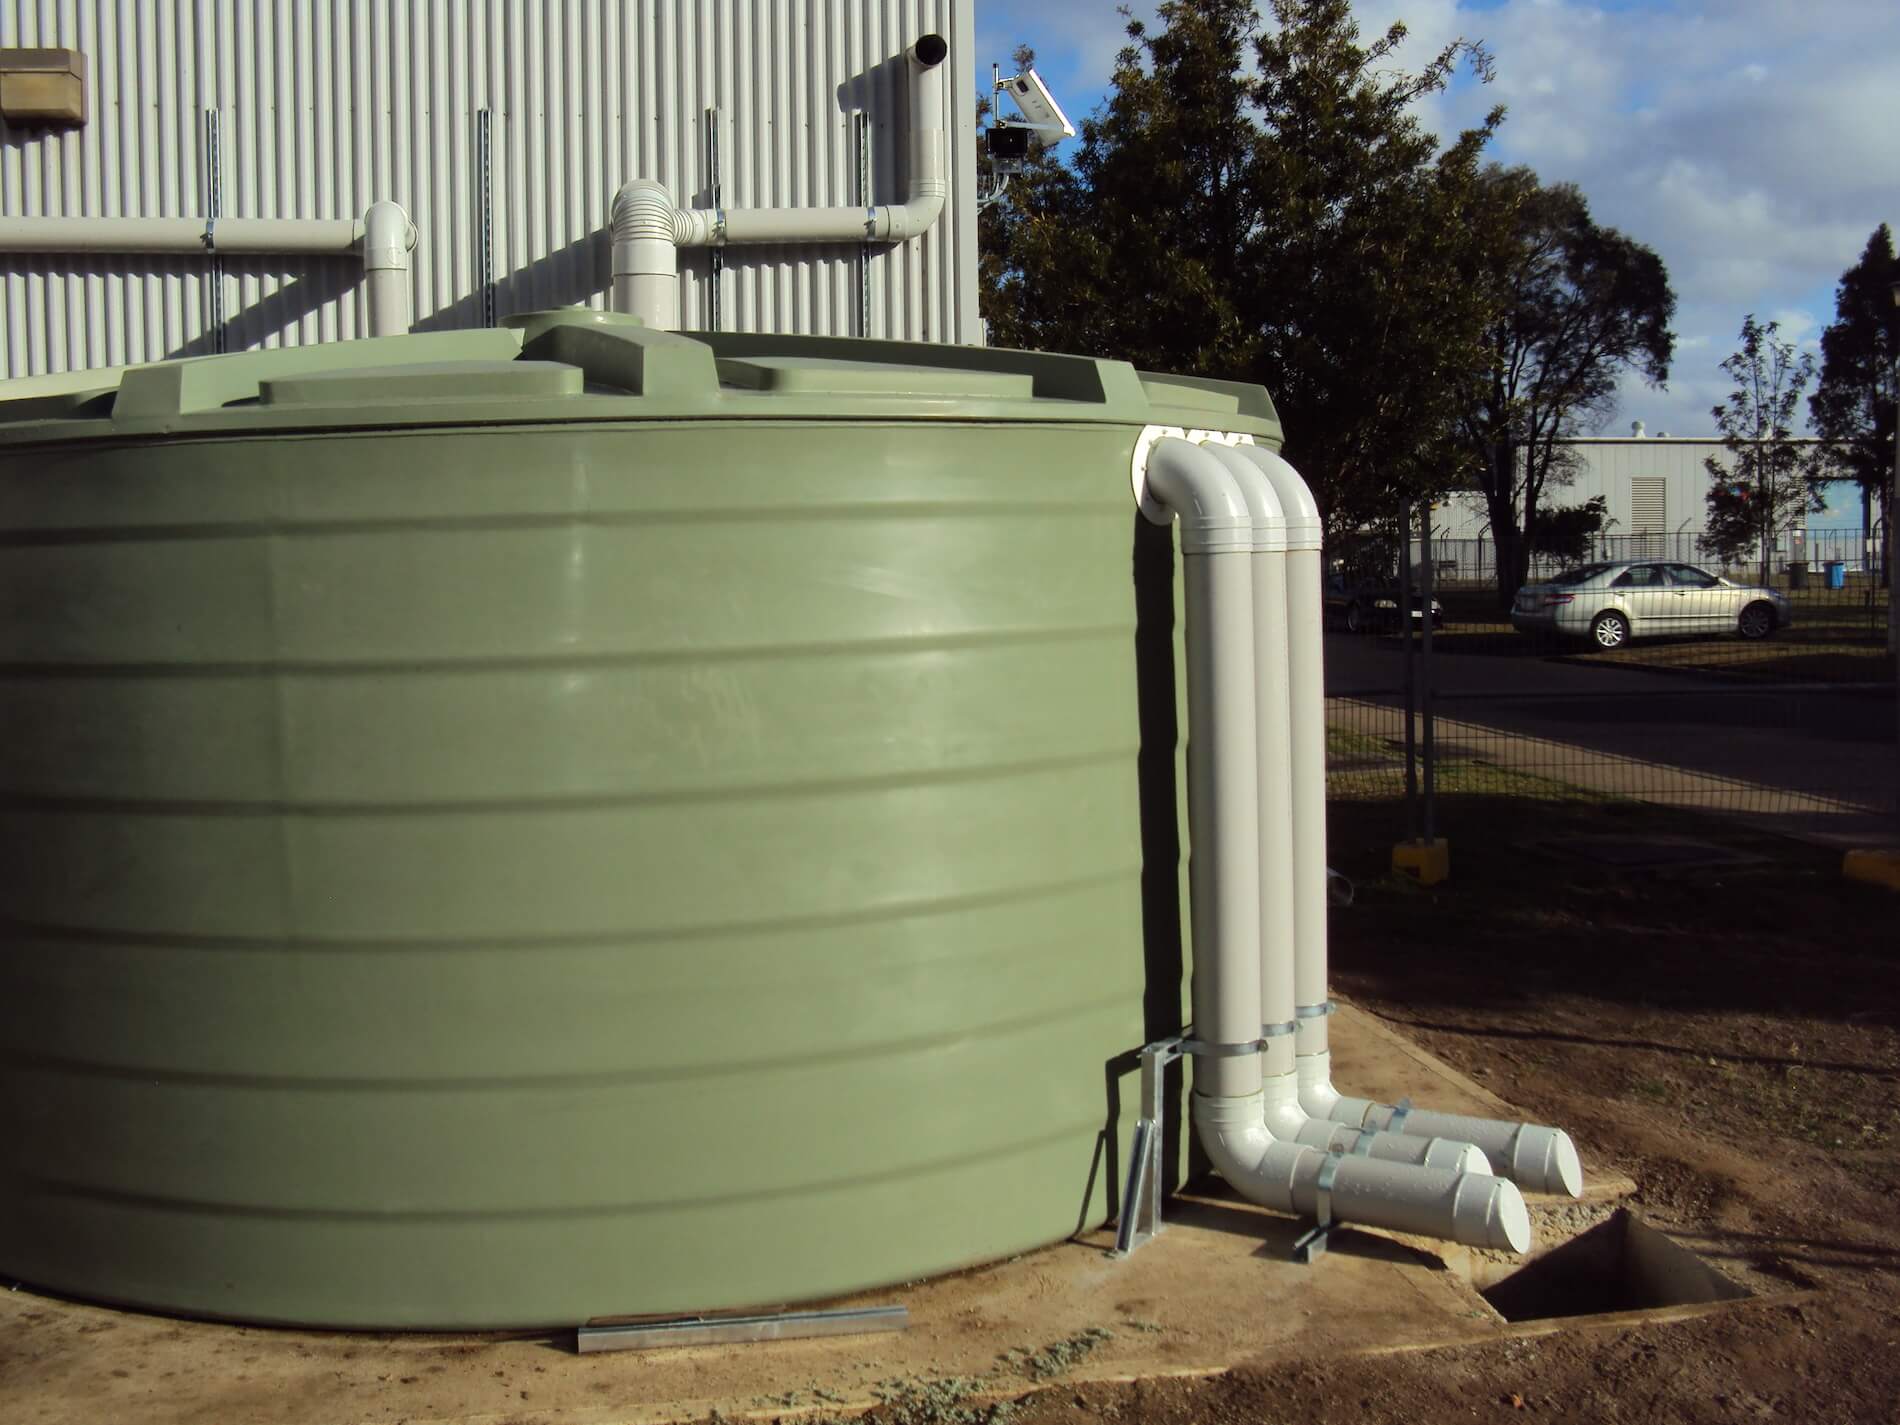 Rainwater harvesting, pumping and treatment for reuse in flushing toilets